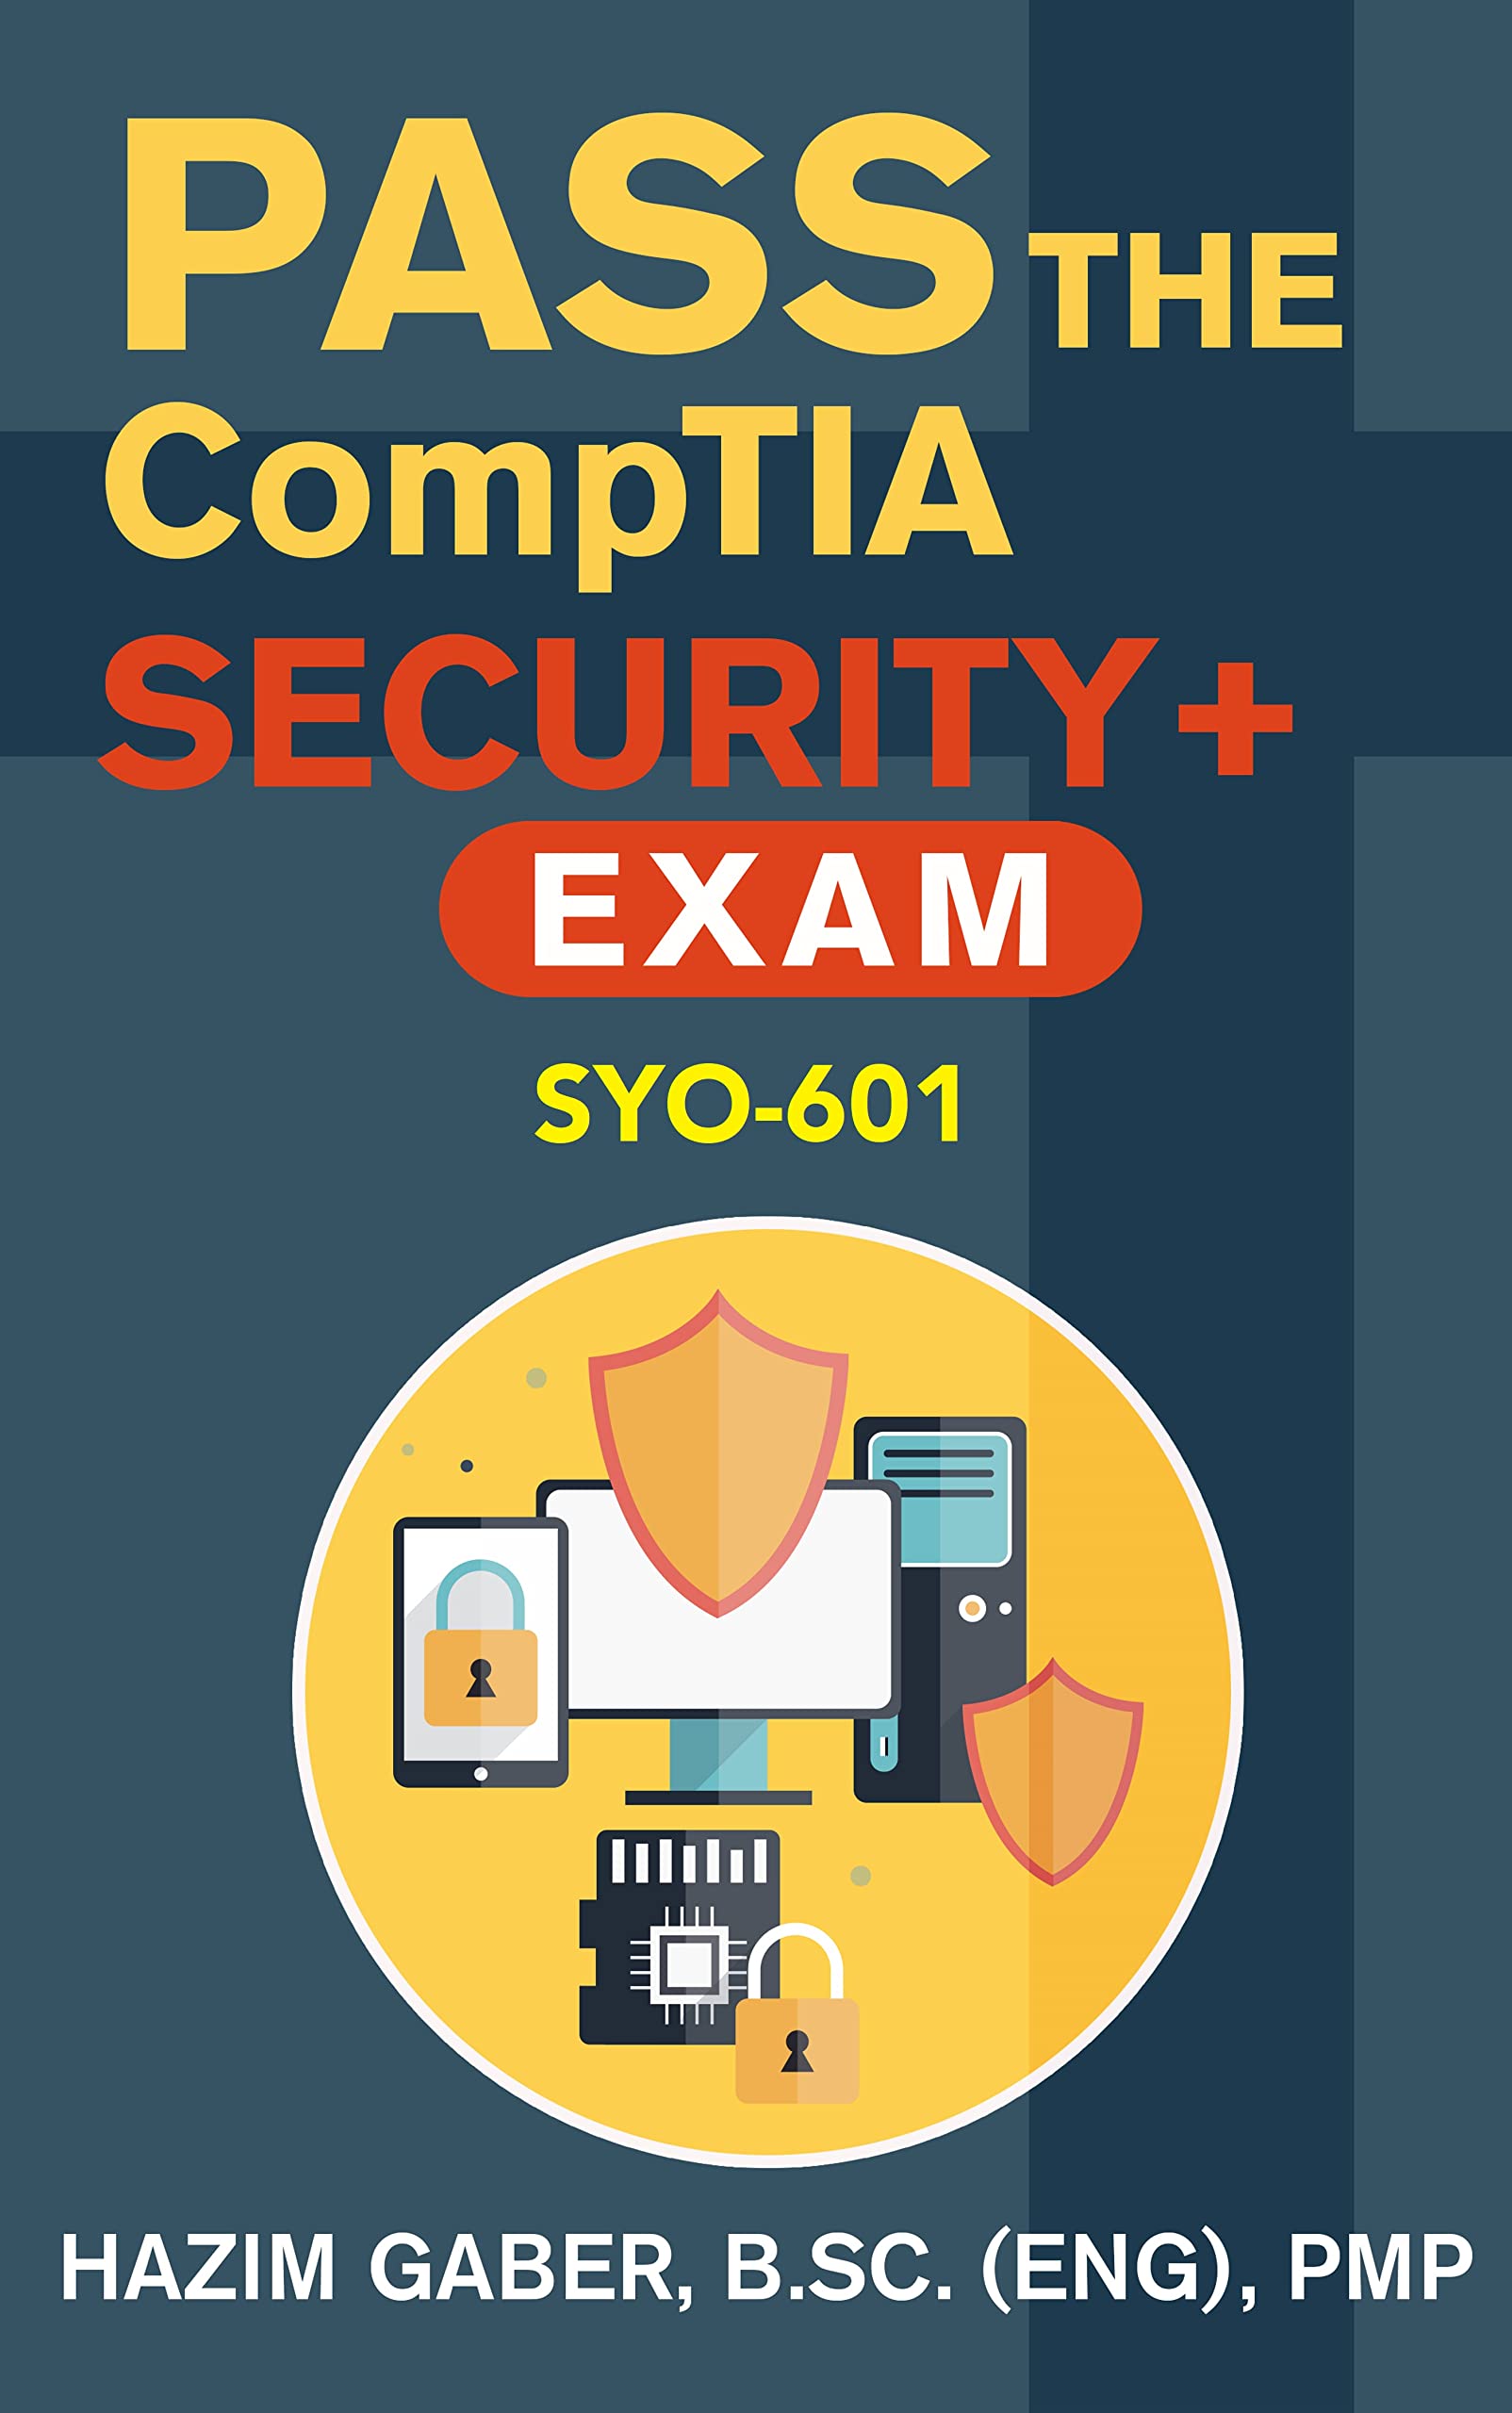 PASS the CompTIA Security+ Exam SY0-601